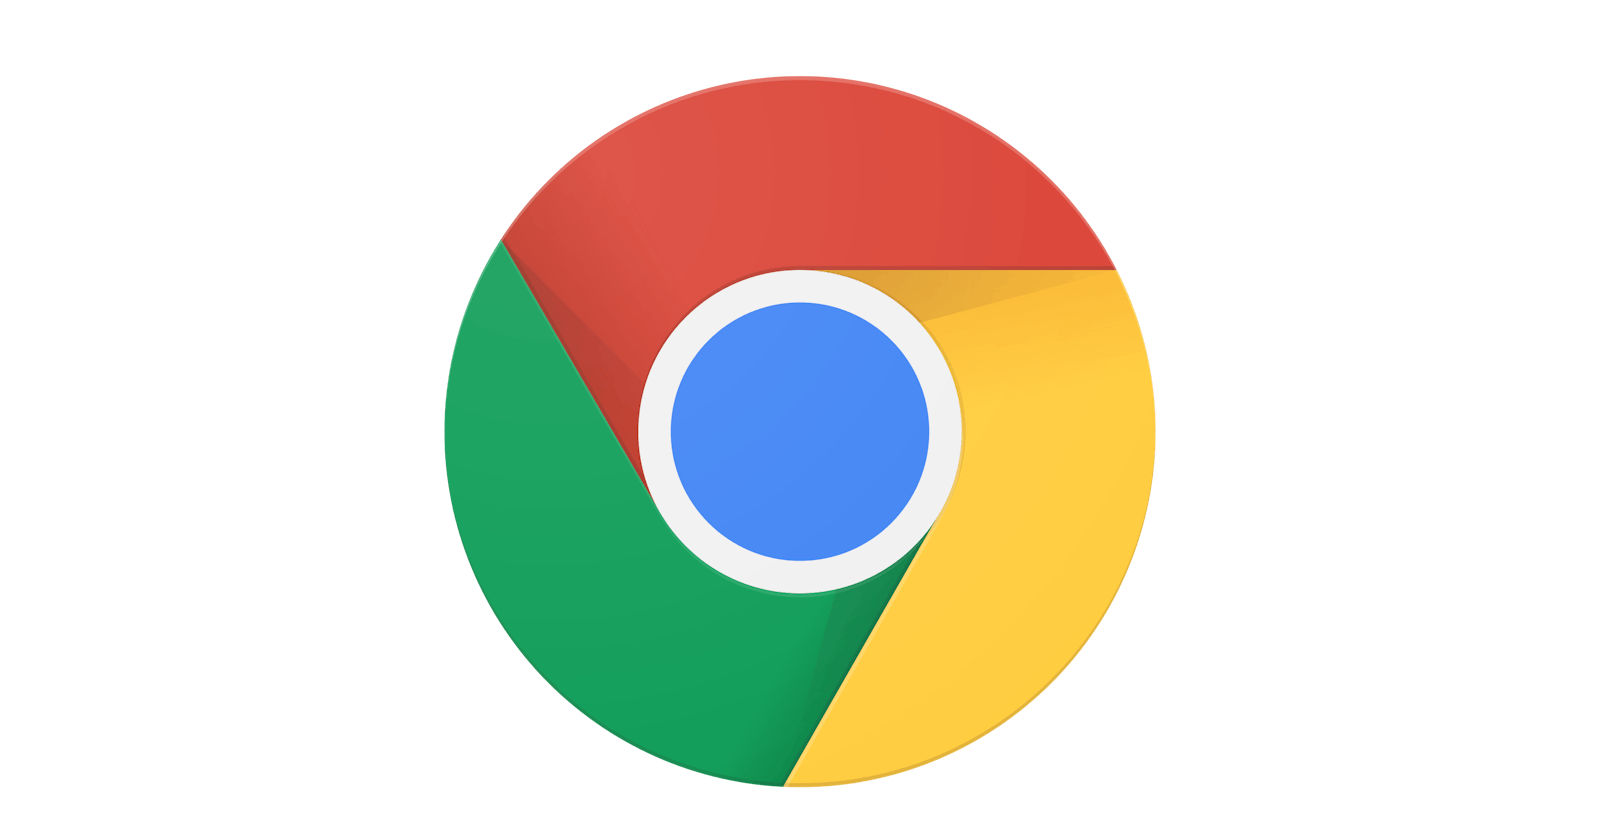 Getting started with chrome developer tools